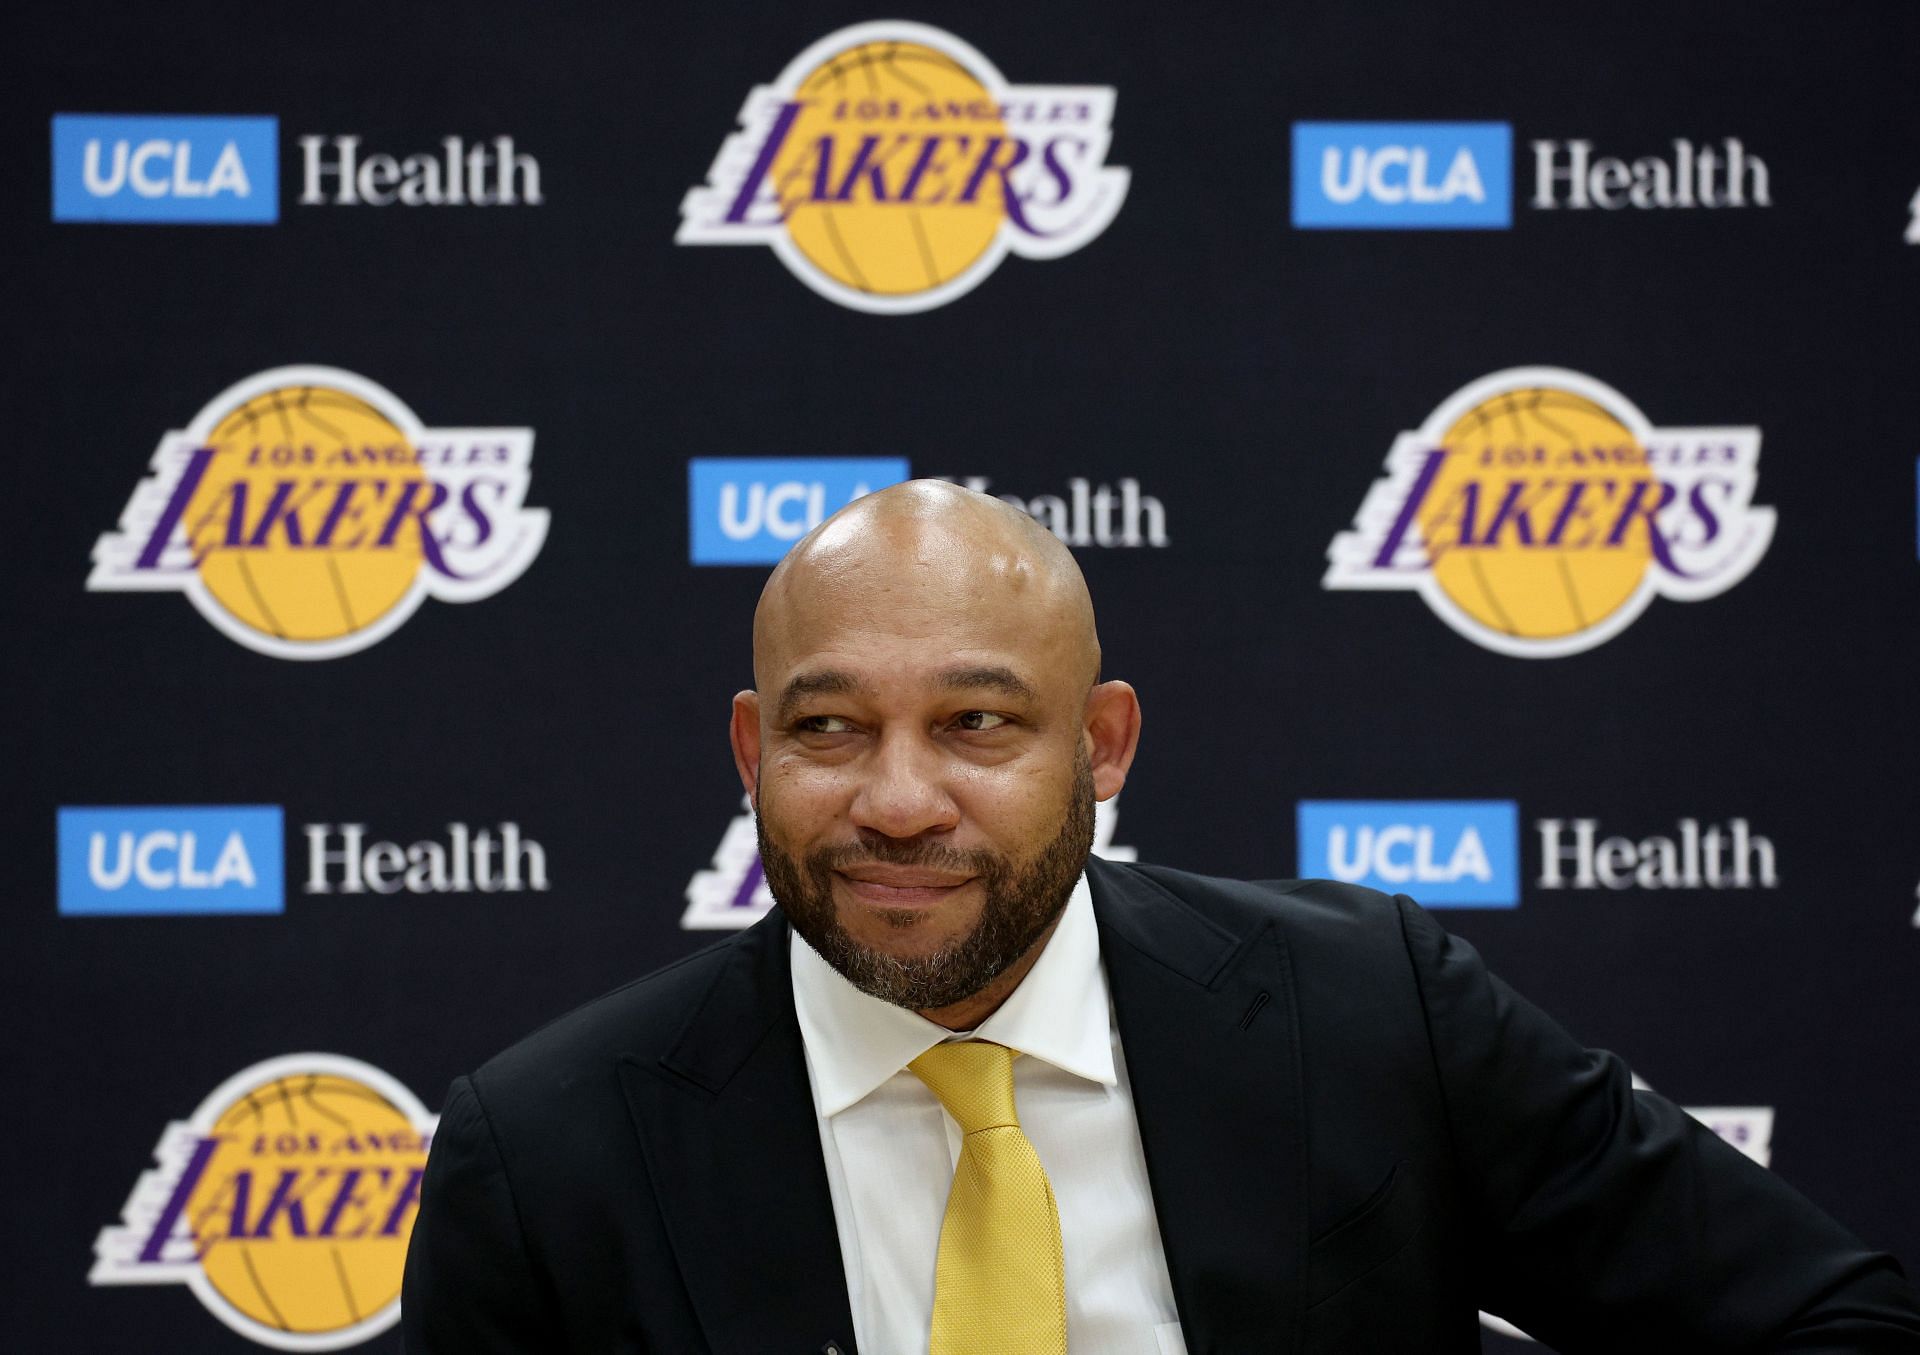 Los Angeles Lakers Introduce Darvin Ham as their head coach.